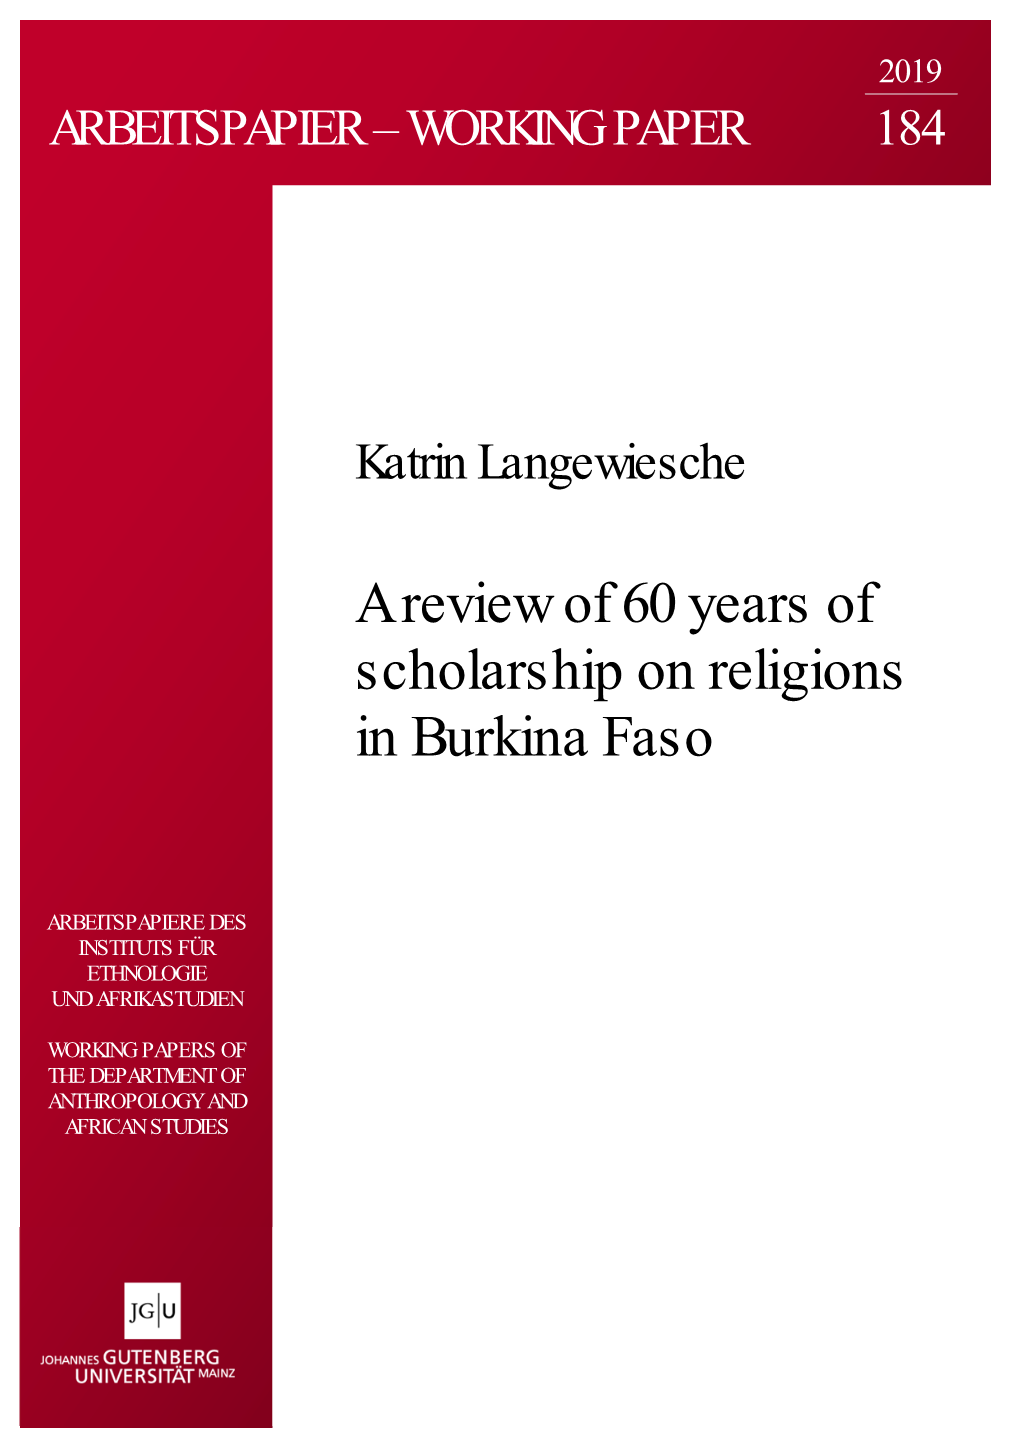 A Review of 60 Years of Scholarship on Religions in Burkina Faso